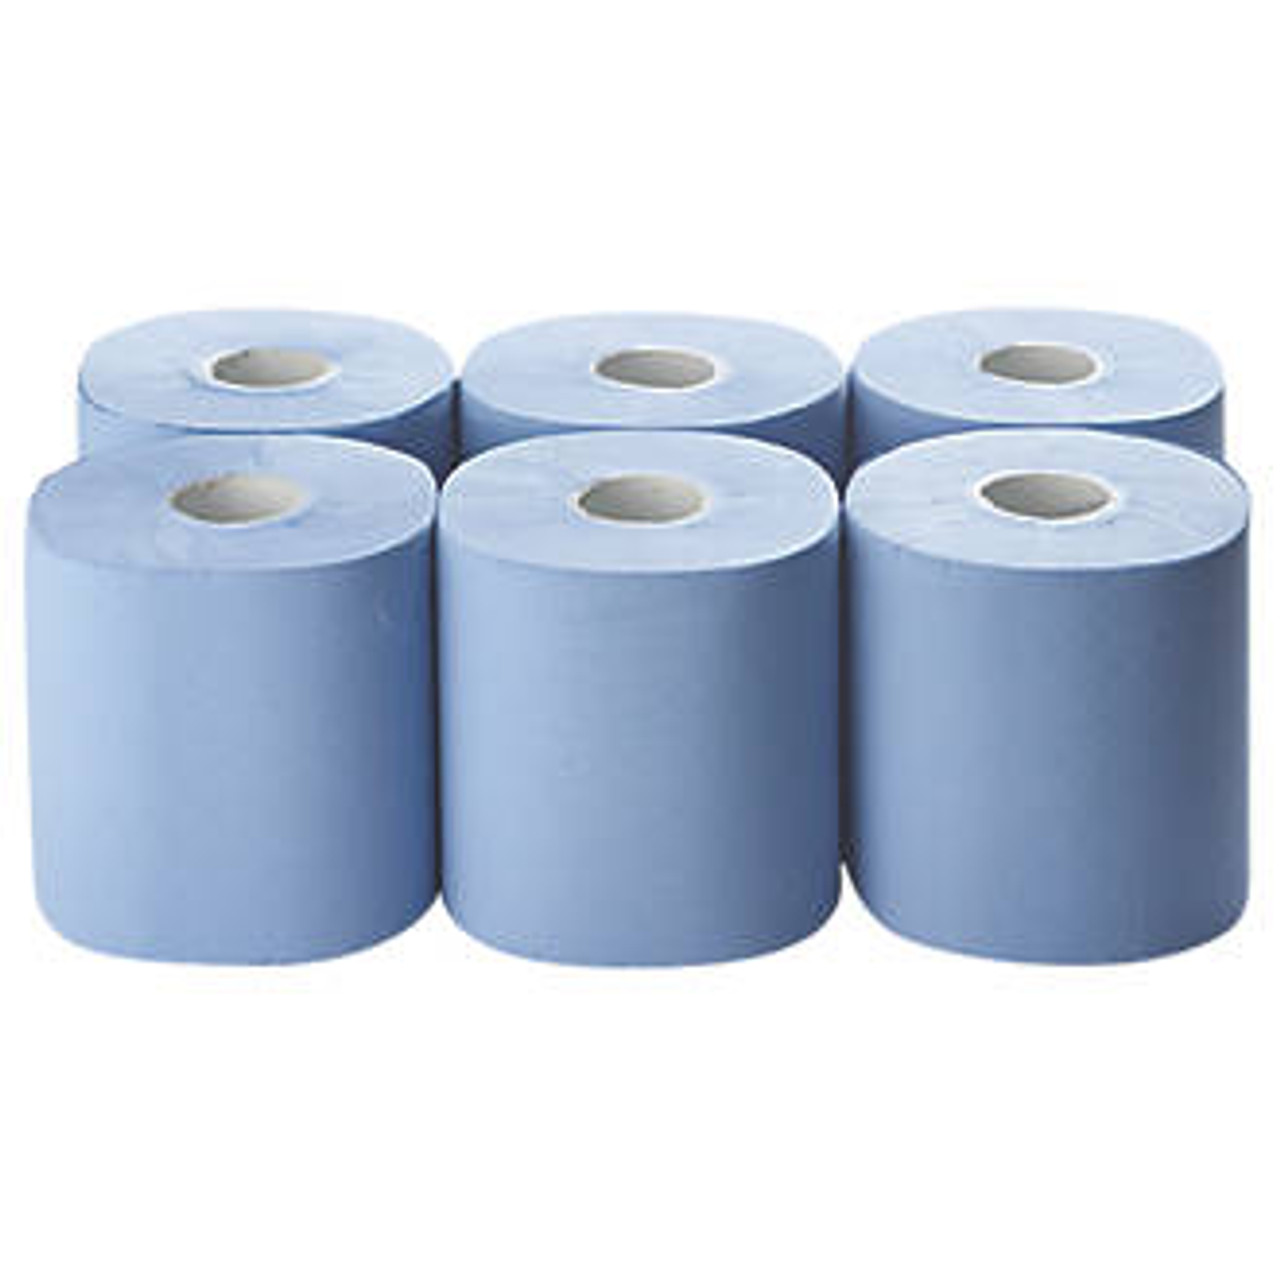 Picture of Value CentreFeed 2Ply Blue Wiper Roll 6X80m Clearance 